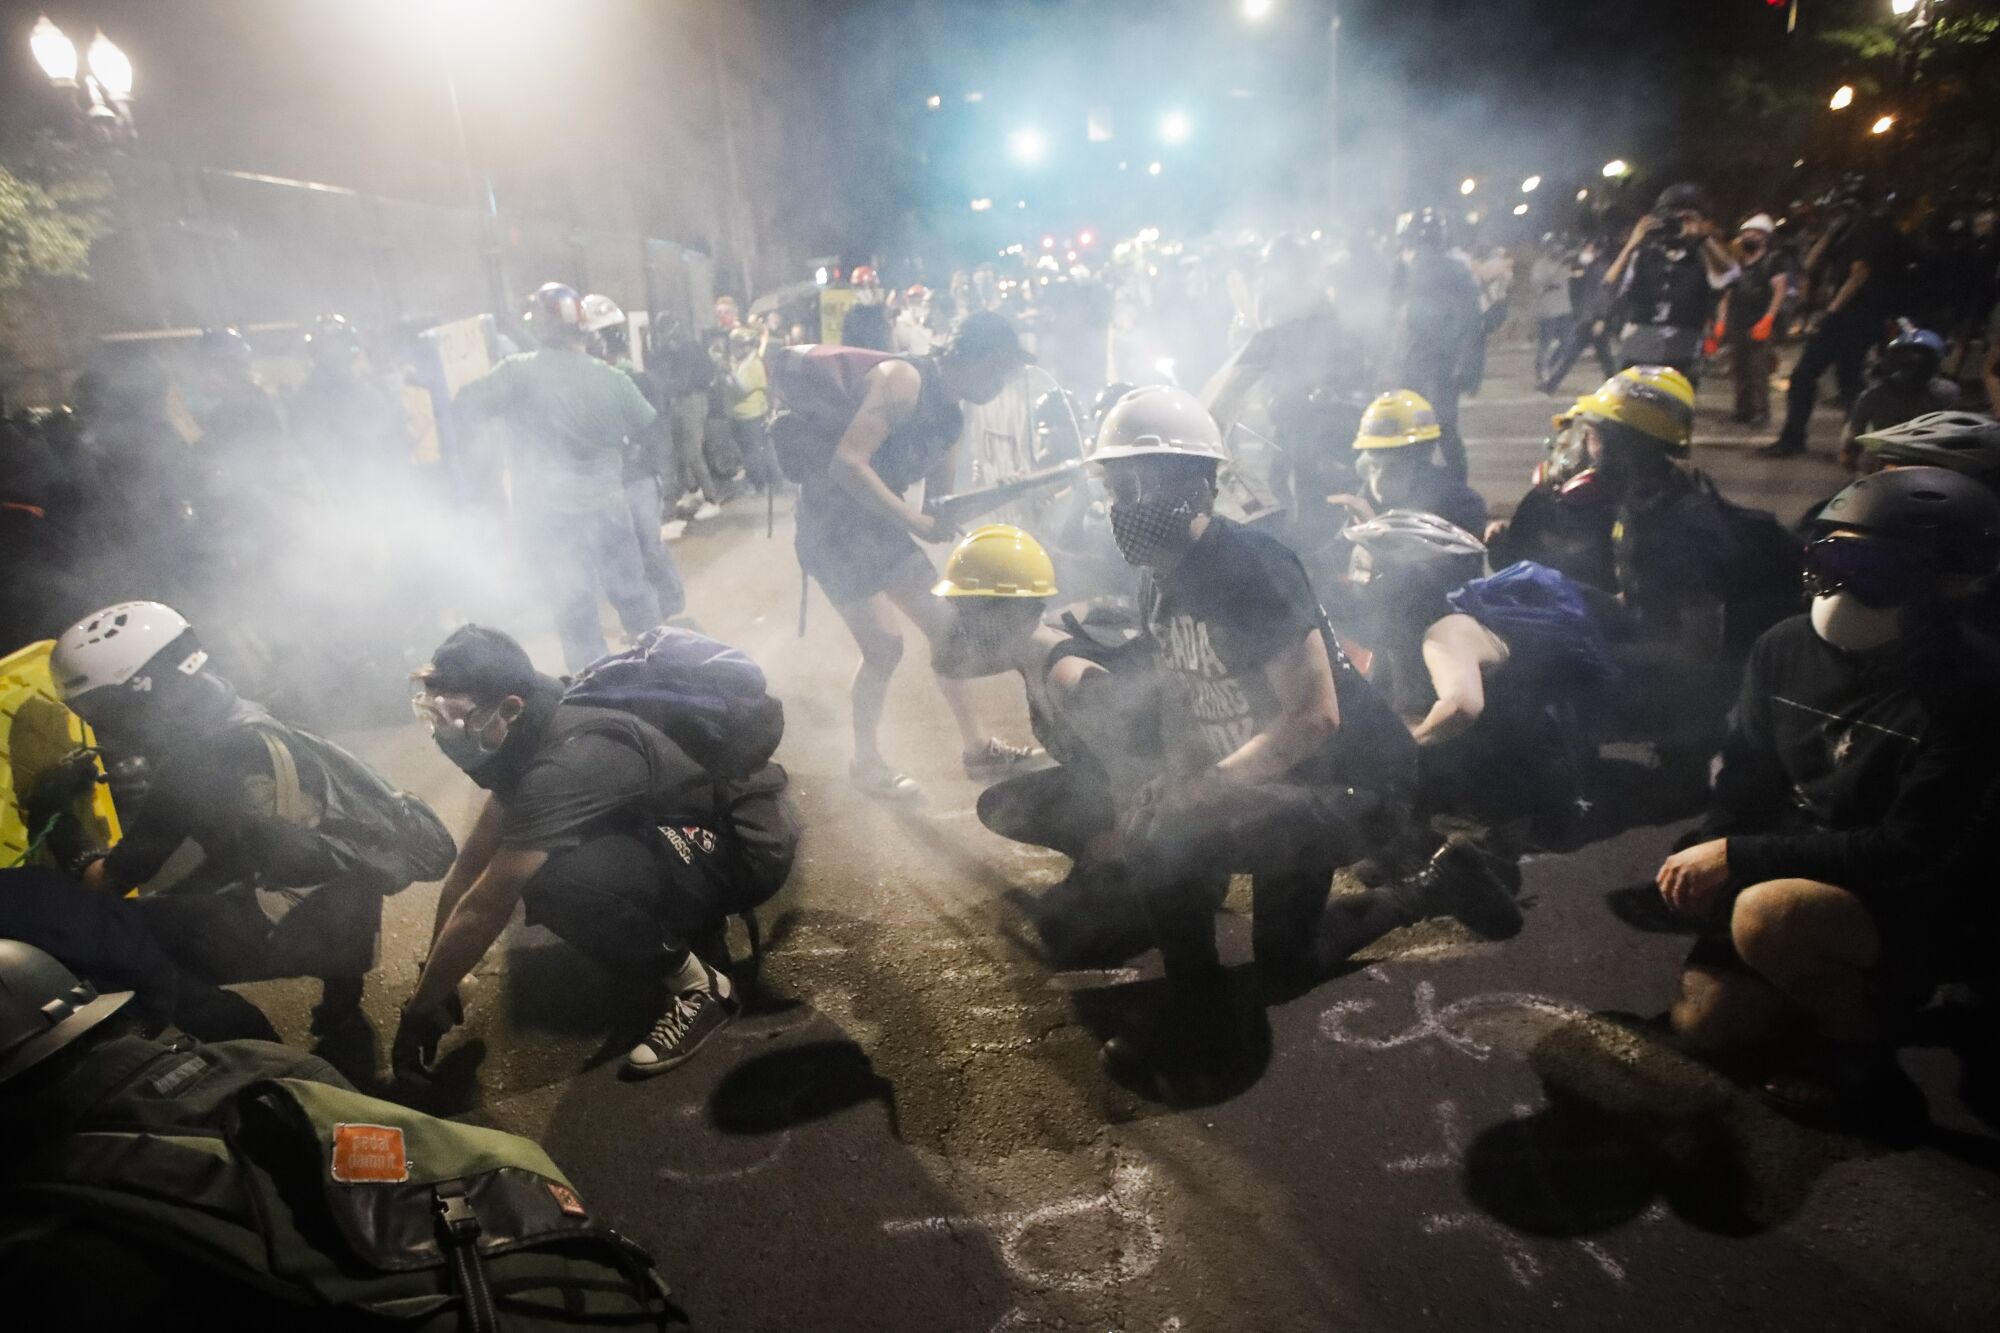 Demonstrators sit and kneel as tear gas fills the air during a Black Lives Matter protest in Portland, Ore.